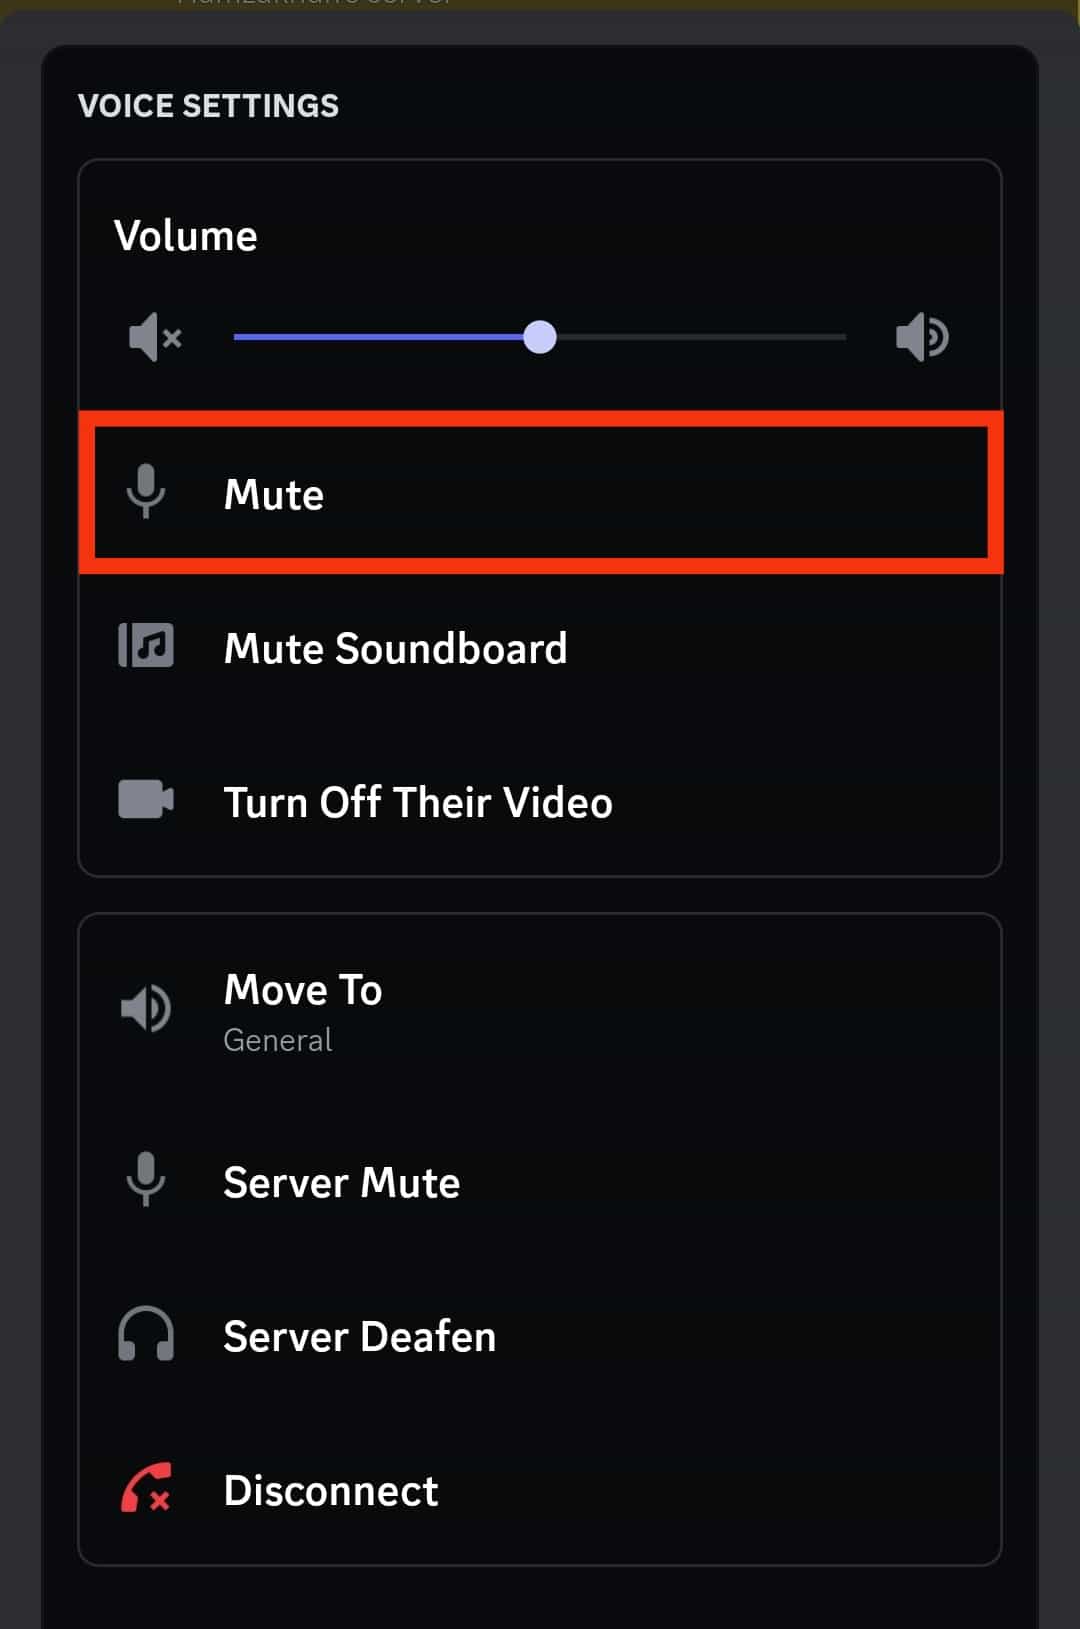 Tap On The Mute Option